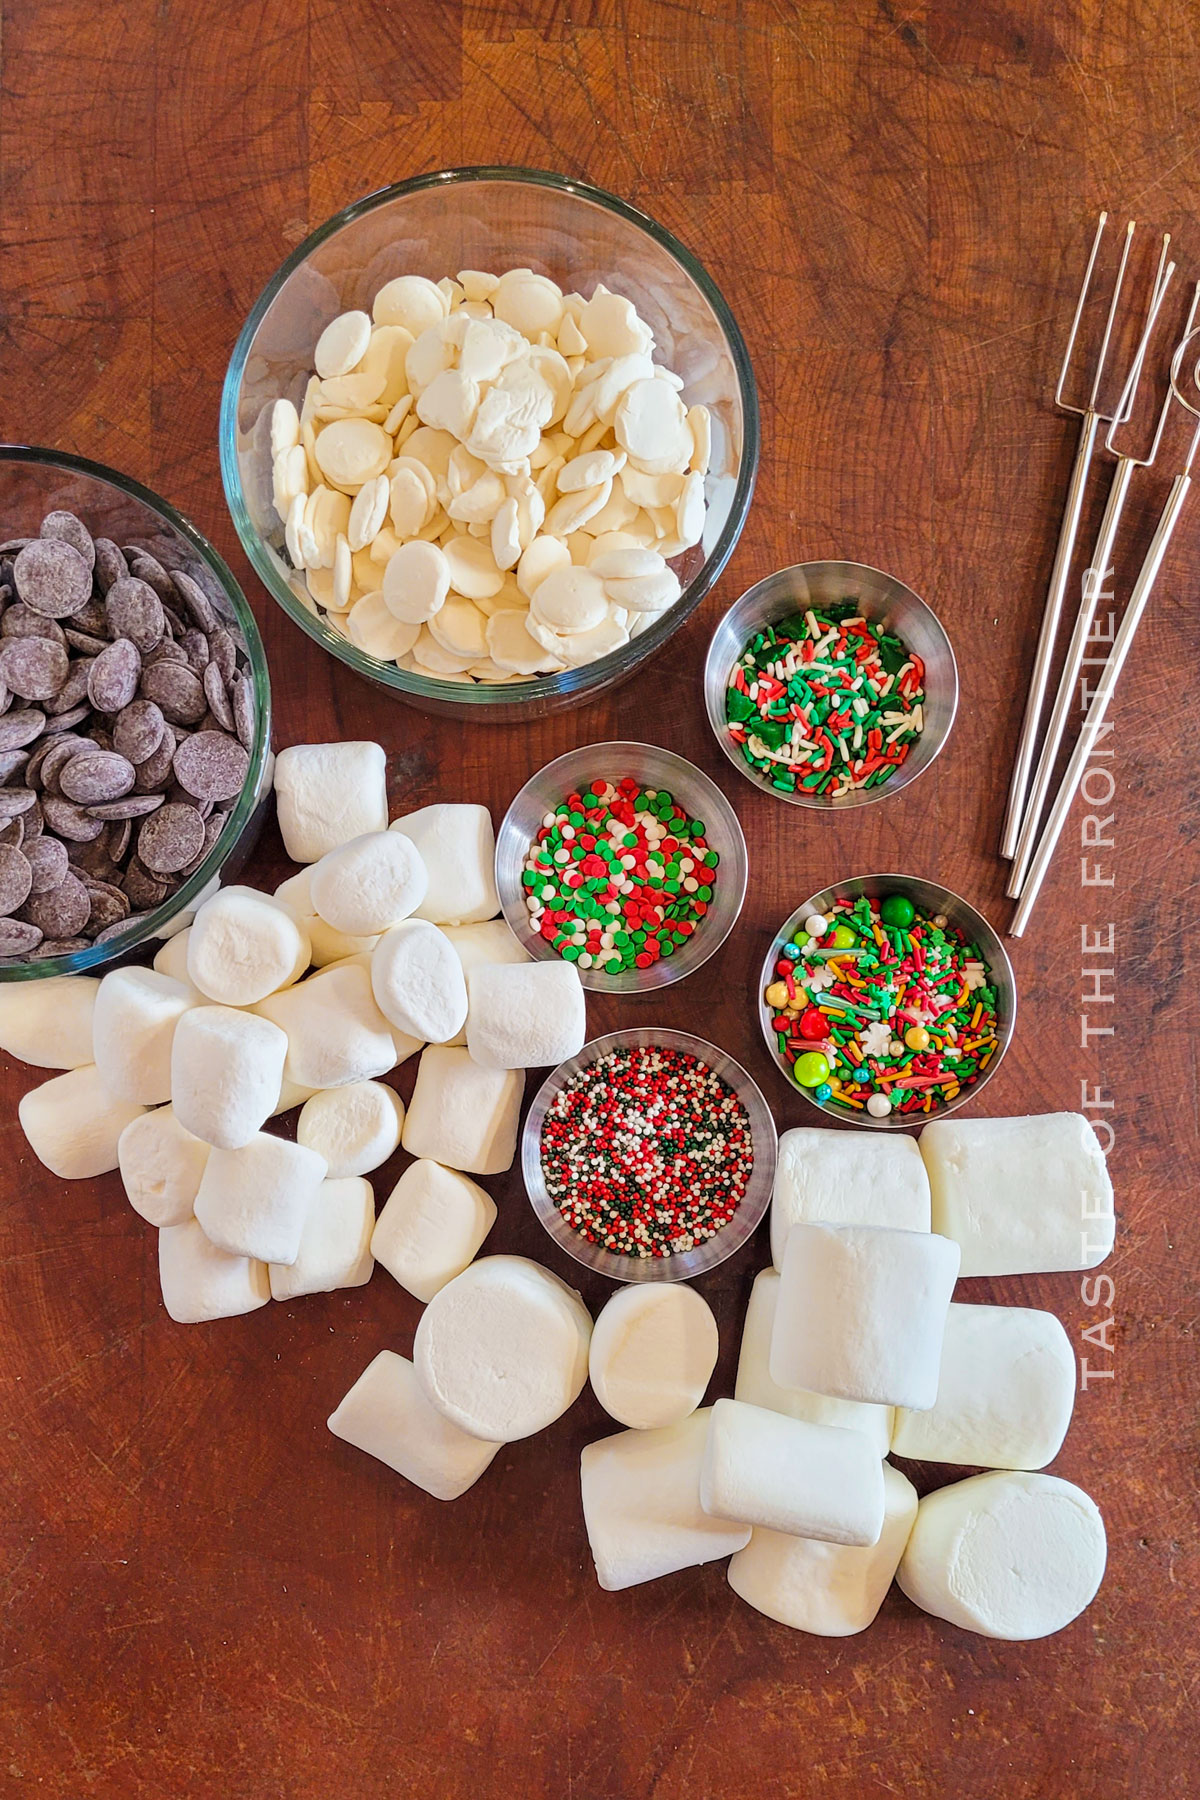 Chocolate Dipped Marshmallow ingredients